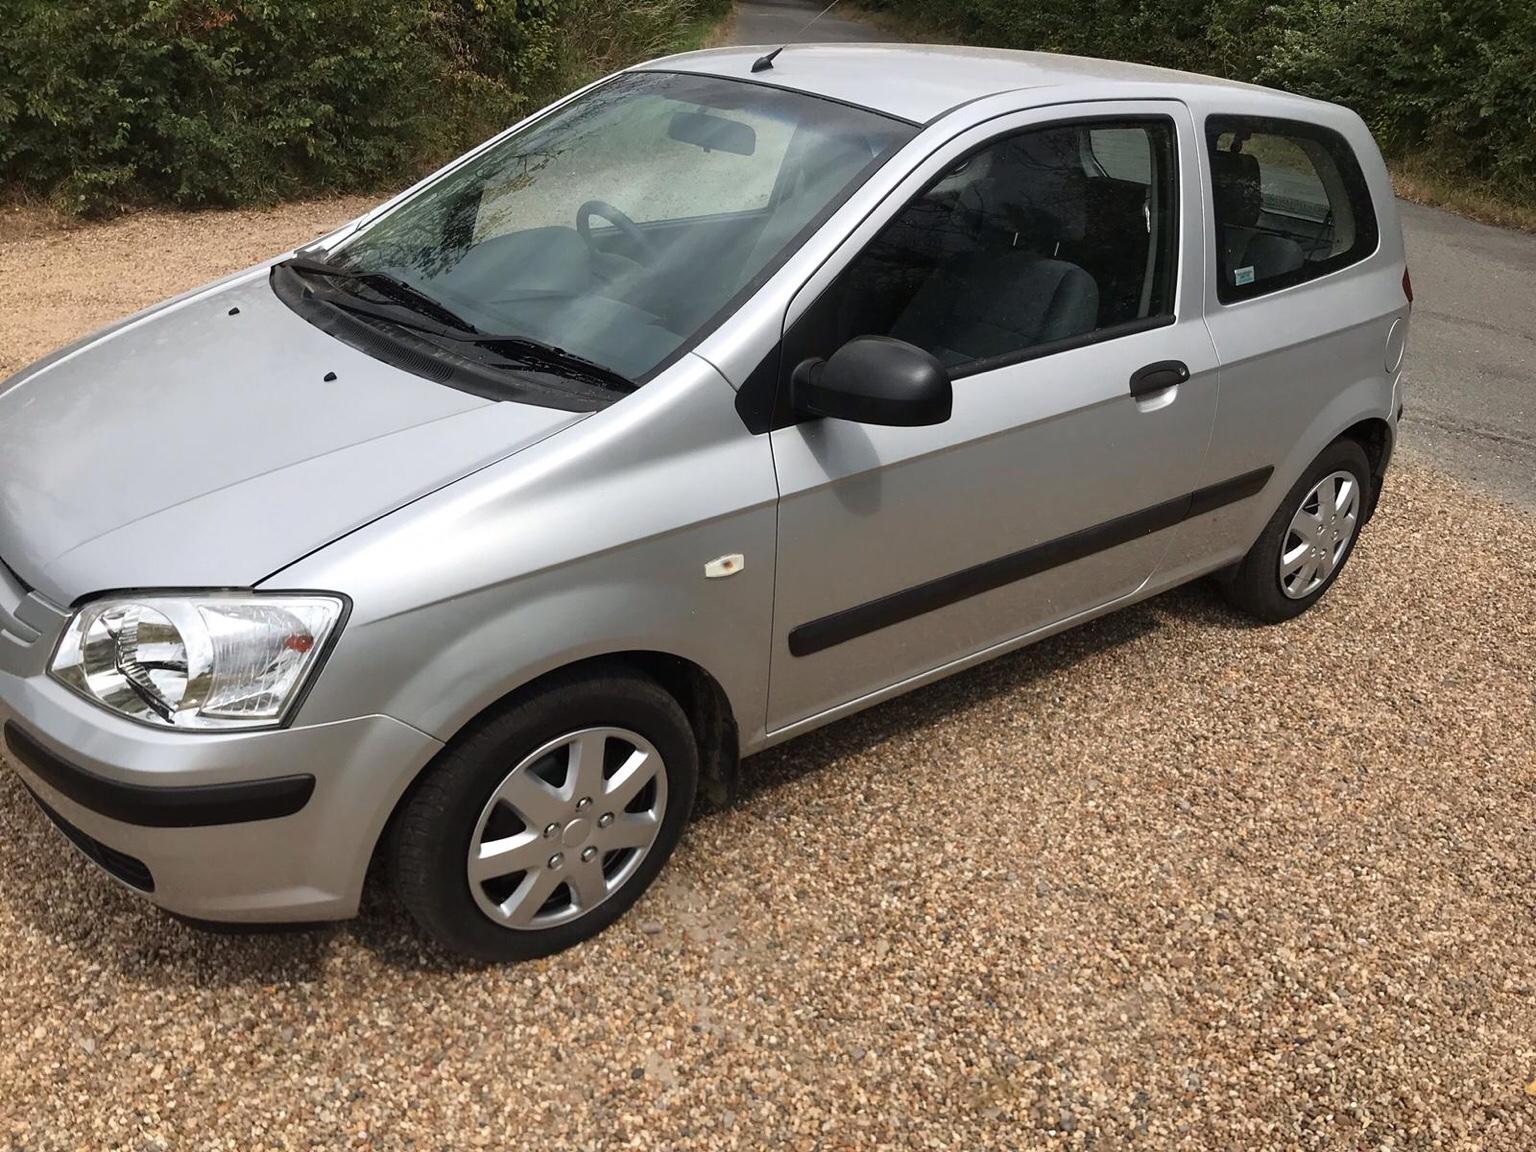 2004 Hyundai Getz in CO7 Tendring for £995.00 for sale